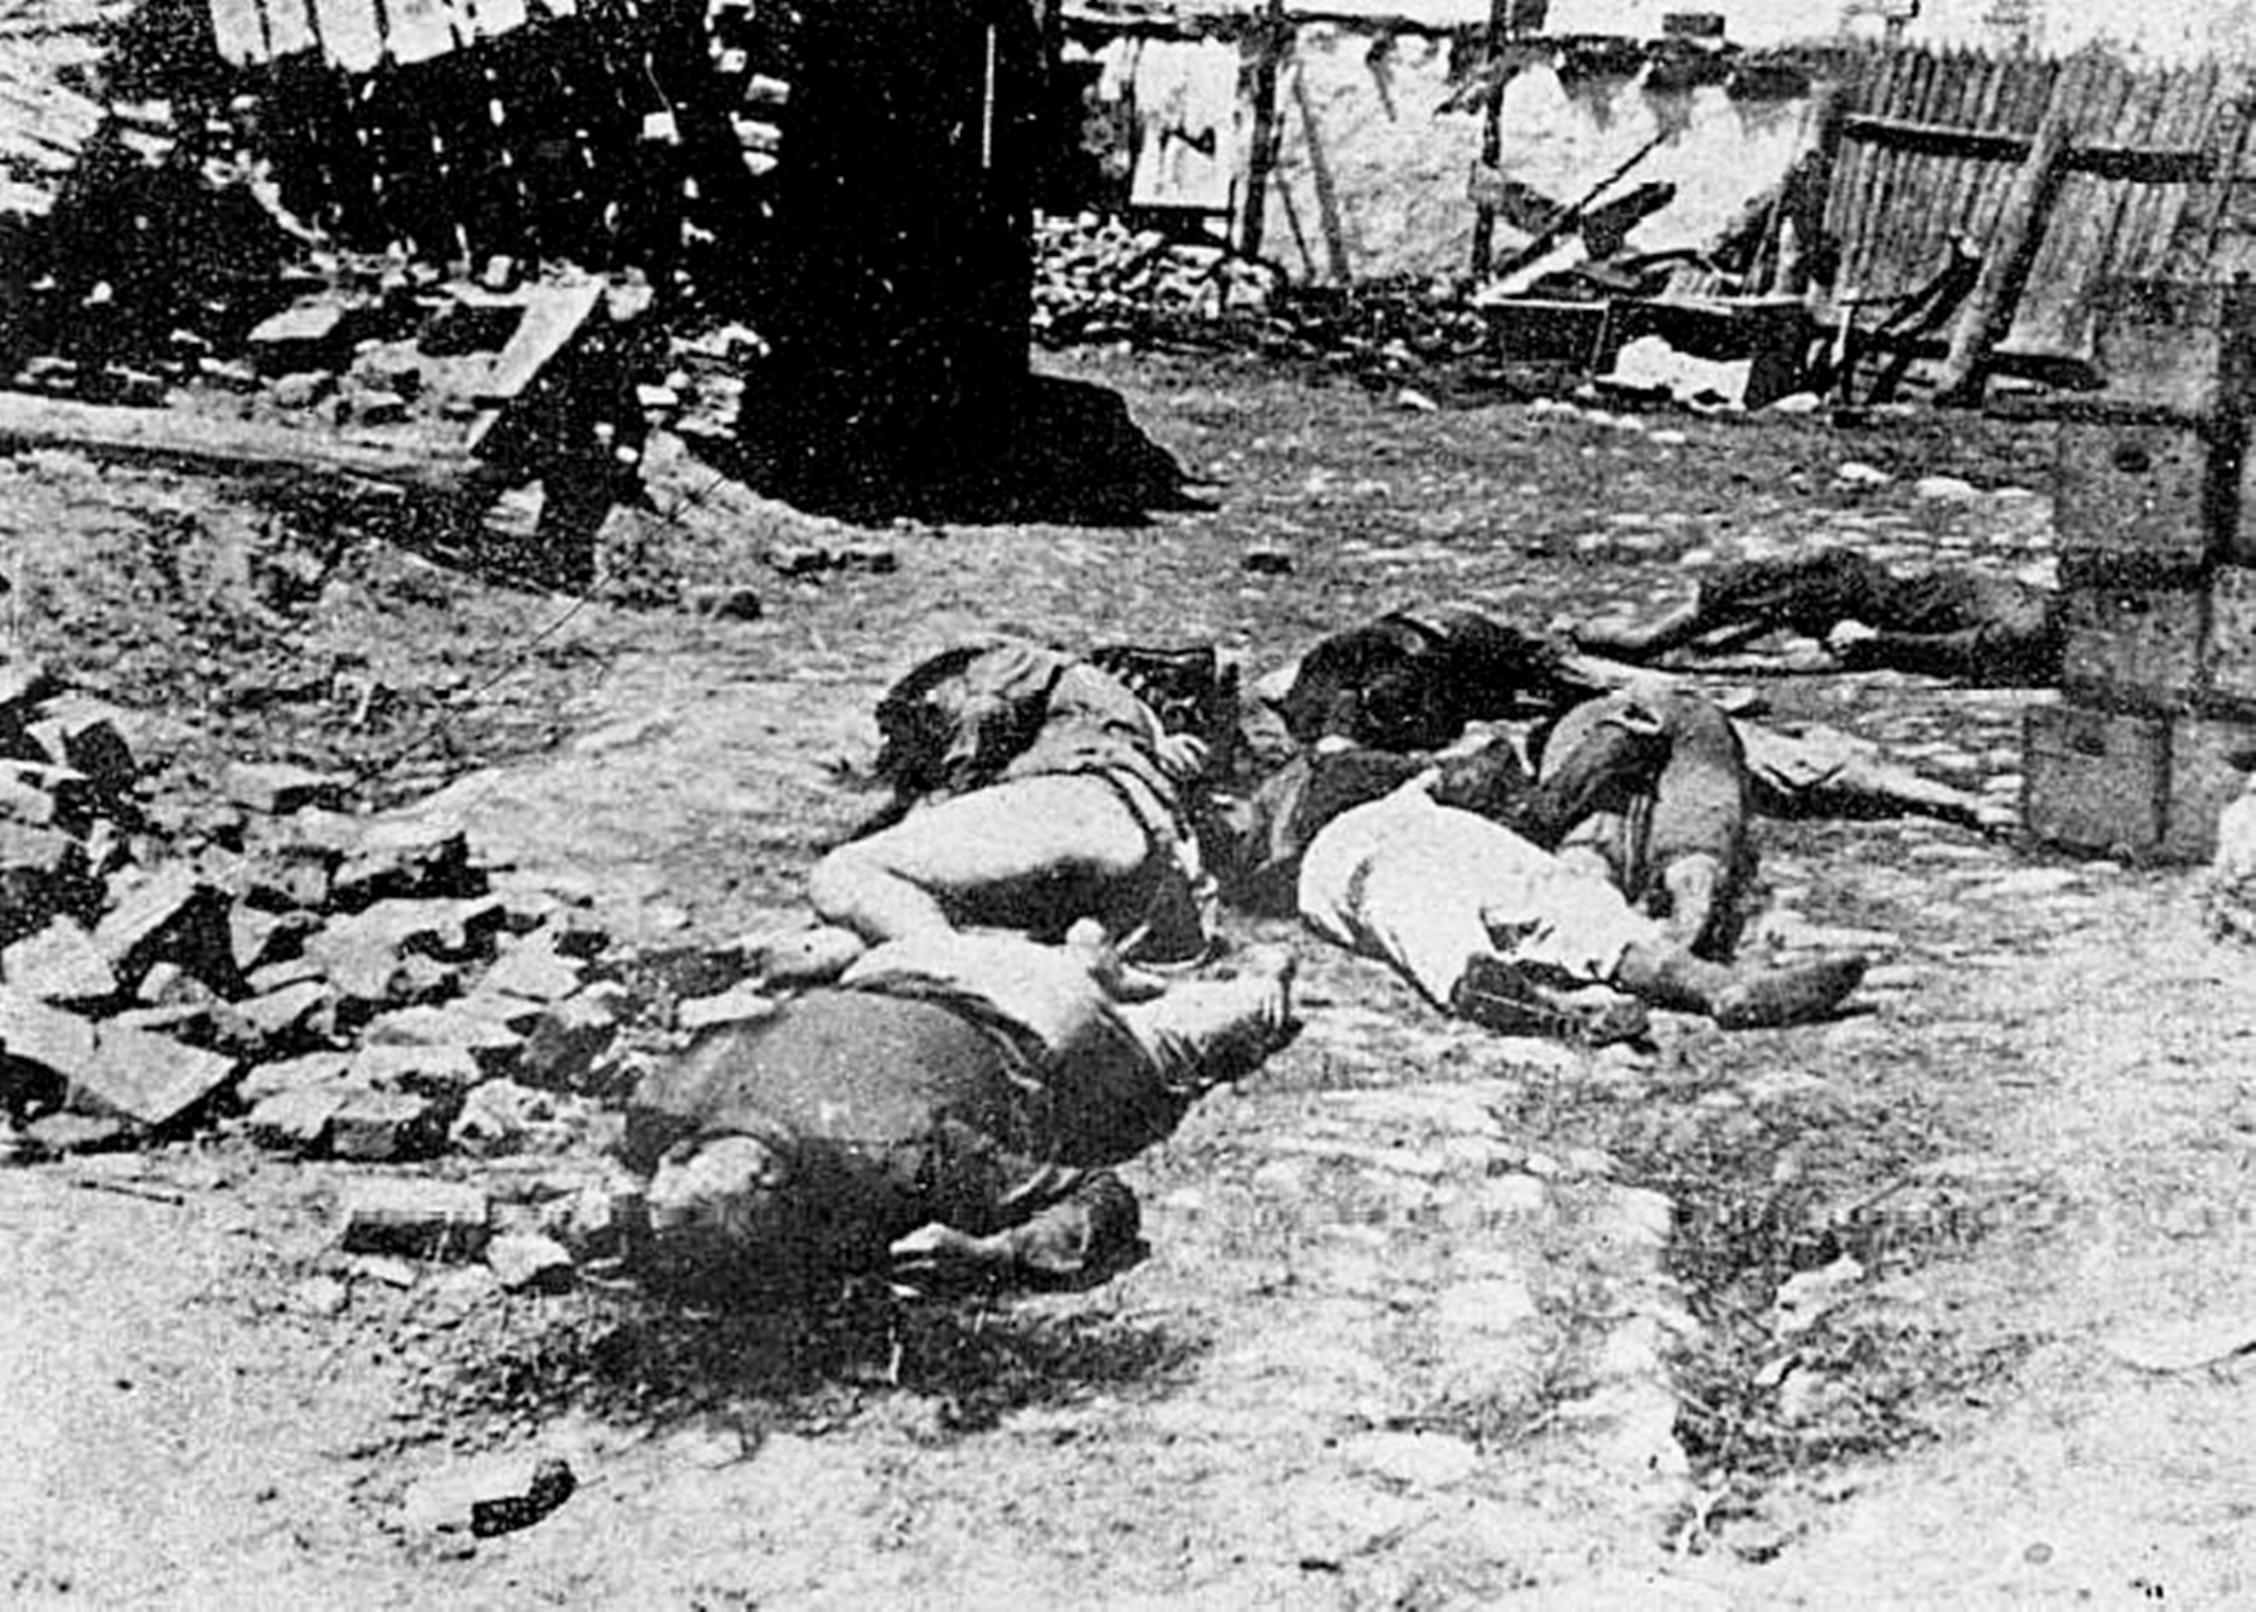 Jewish Romanian deportees, murdered by their Romanian escorts in Transnistria, Oct. 1941 (Wikipedia)